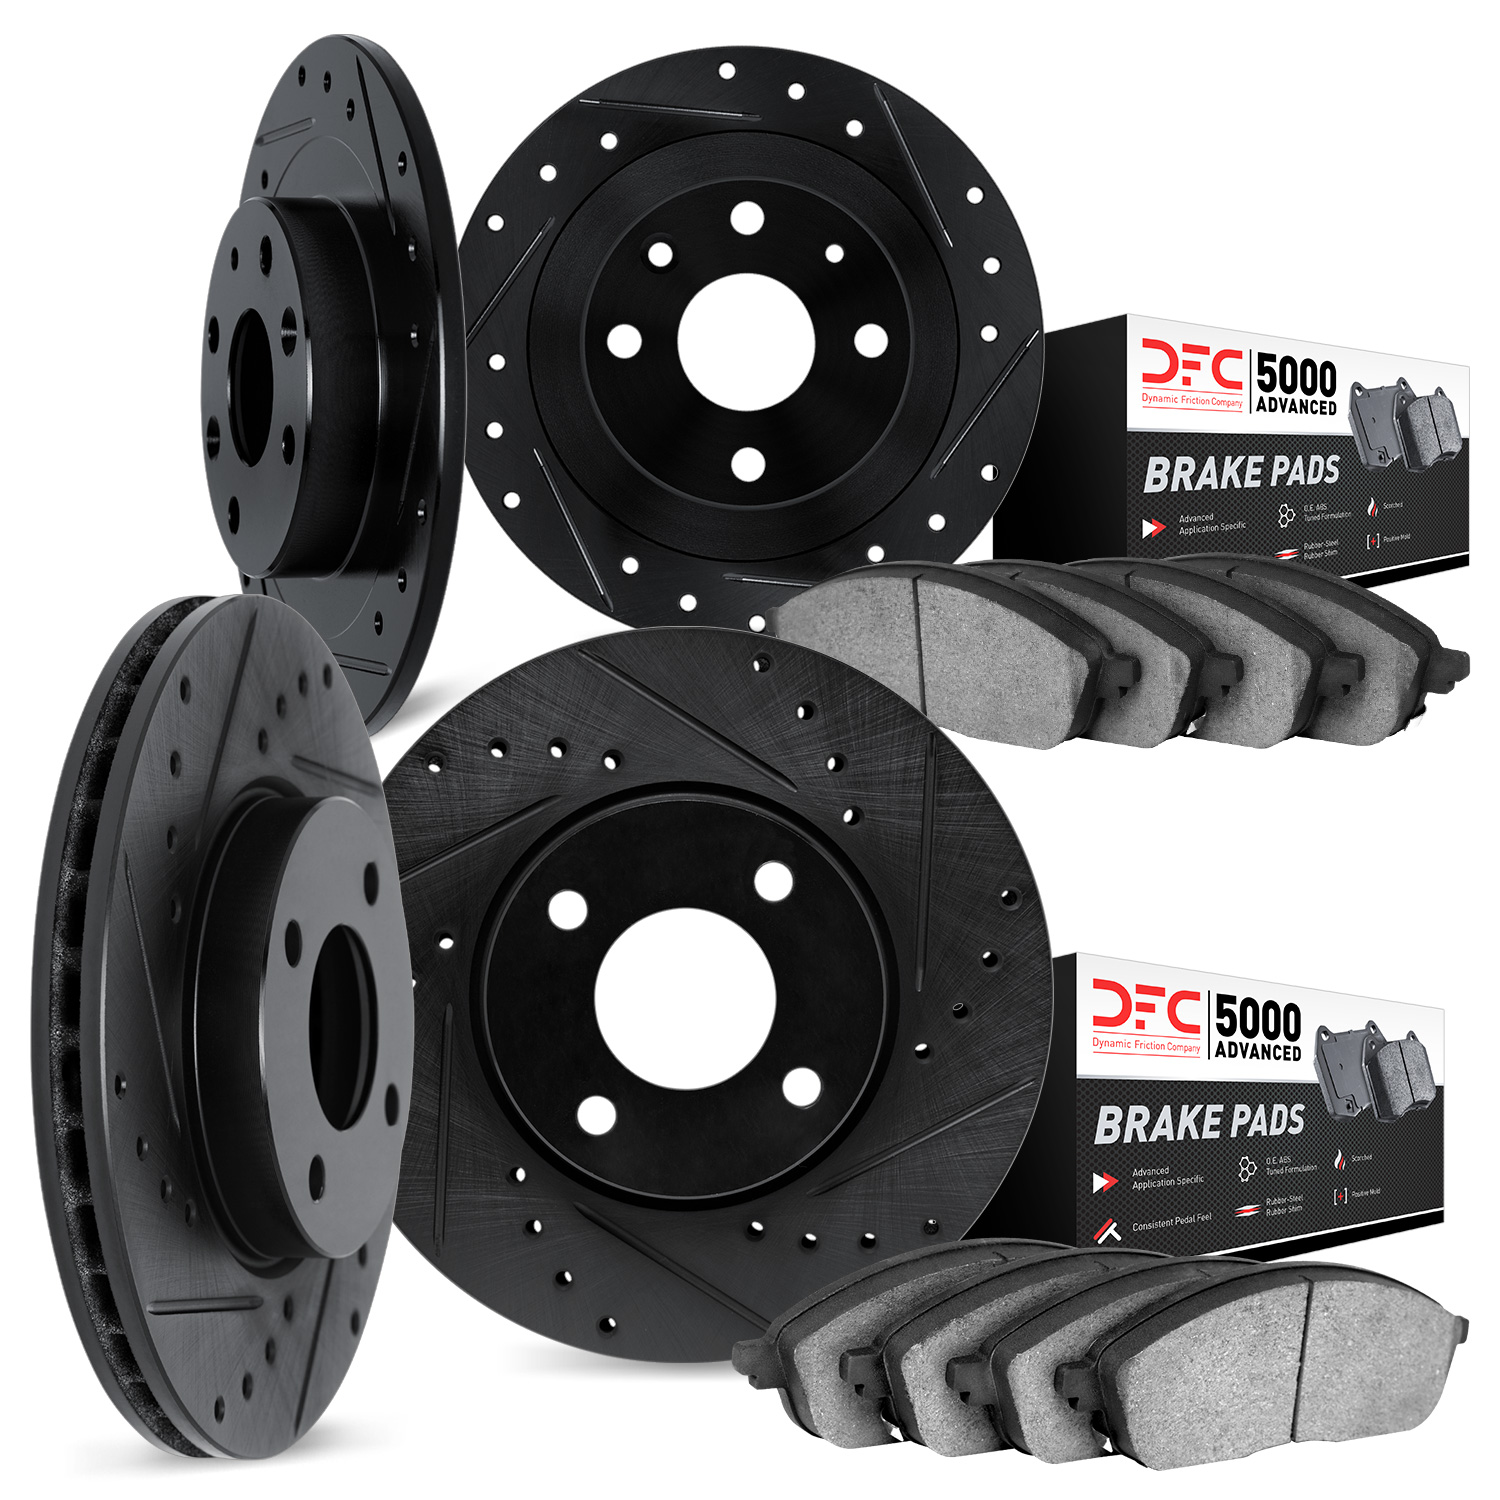 8504-32002 Drilled/Slotted Brake Rotors w/5000 Advanced Brake Pads Kit [Black], 2007-2015 Mini, Position: Front and Rear